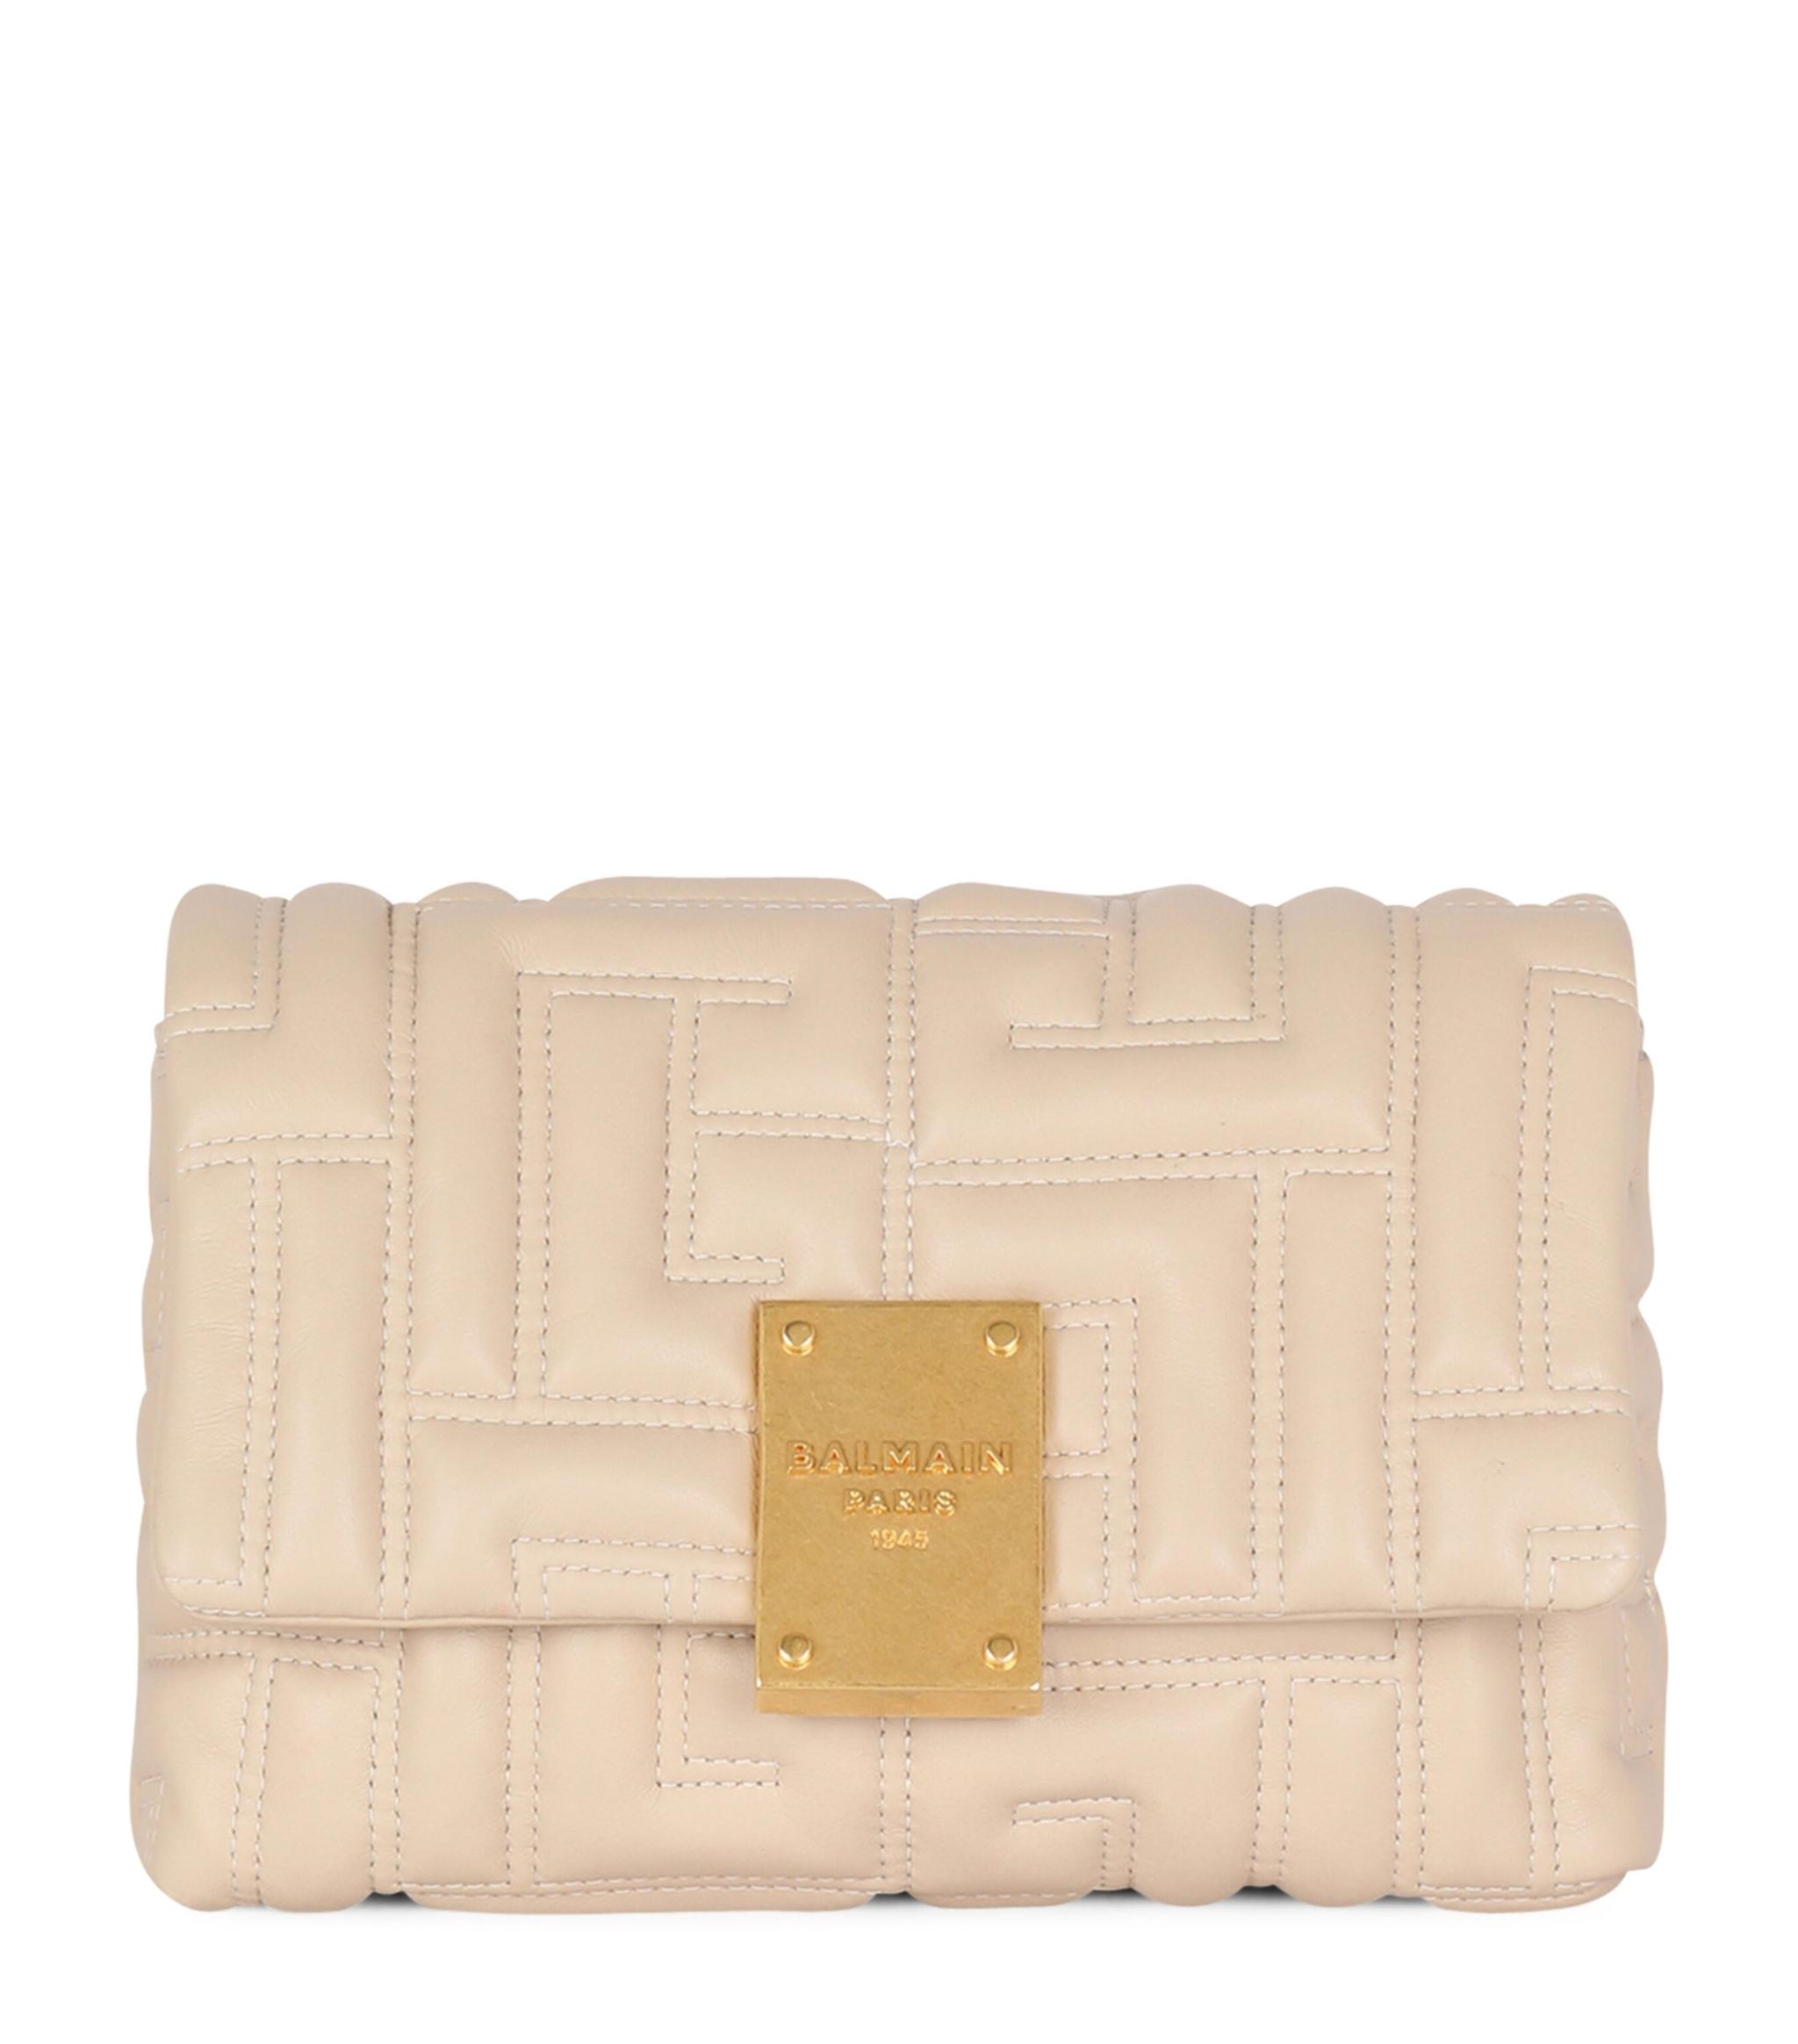 Balmain Quilted Leather 1945 Soft Cross-body Bag in Natural | Lyst